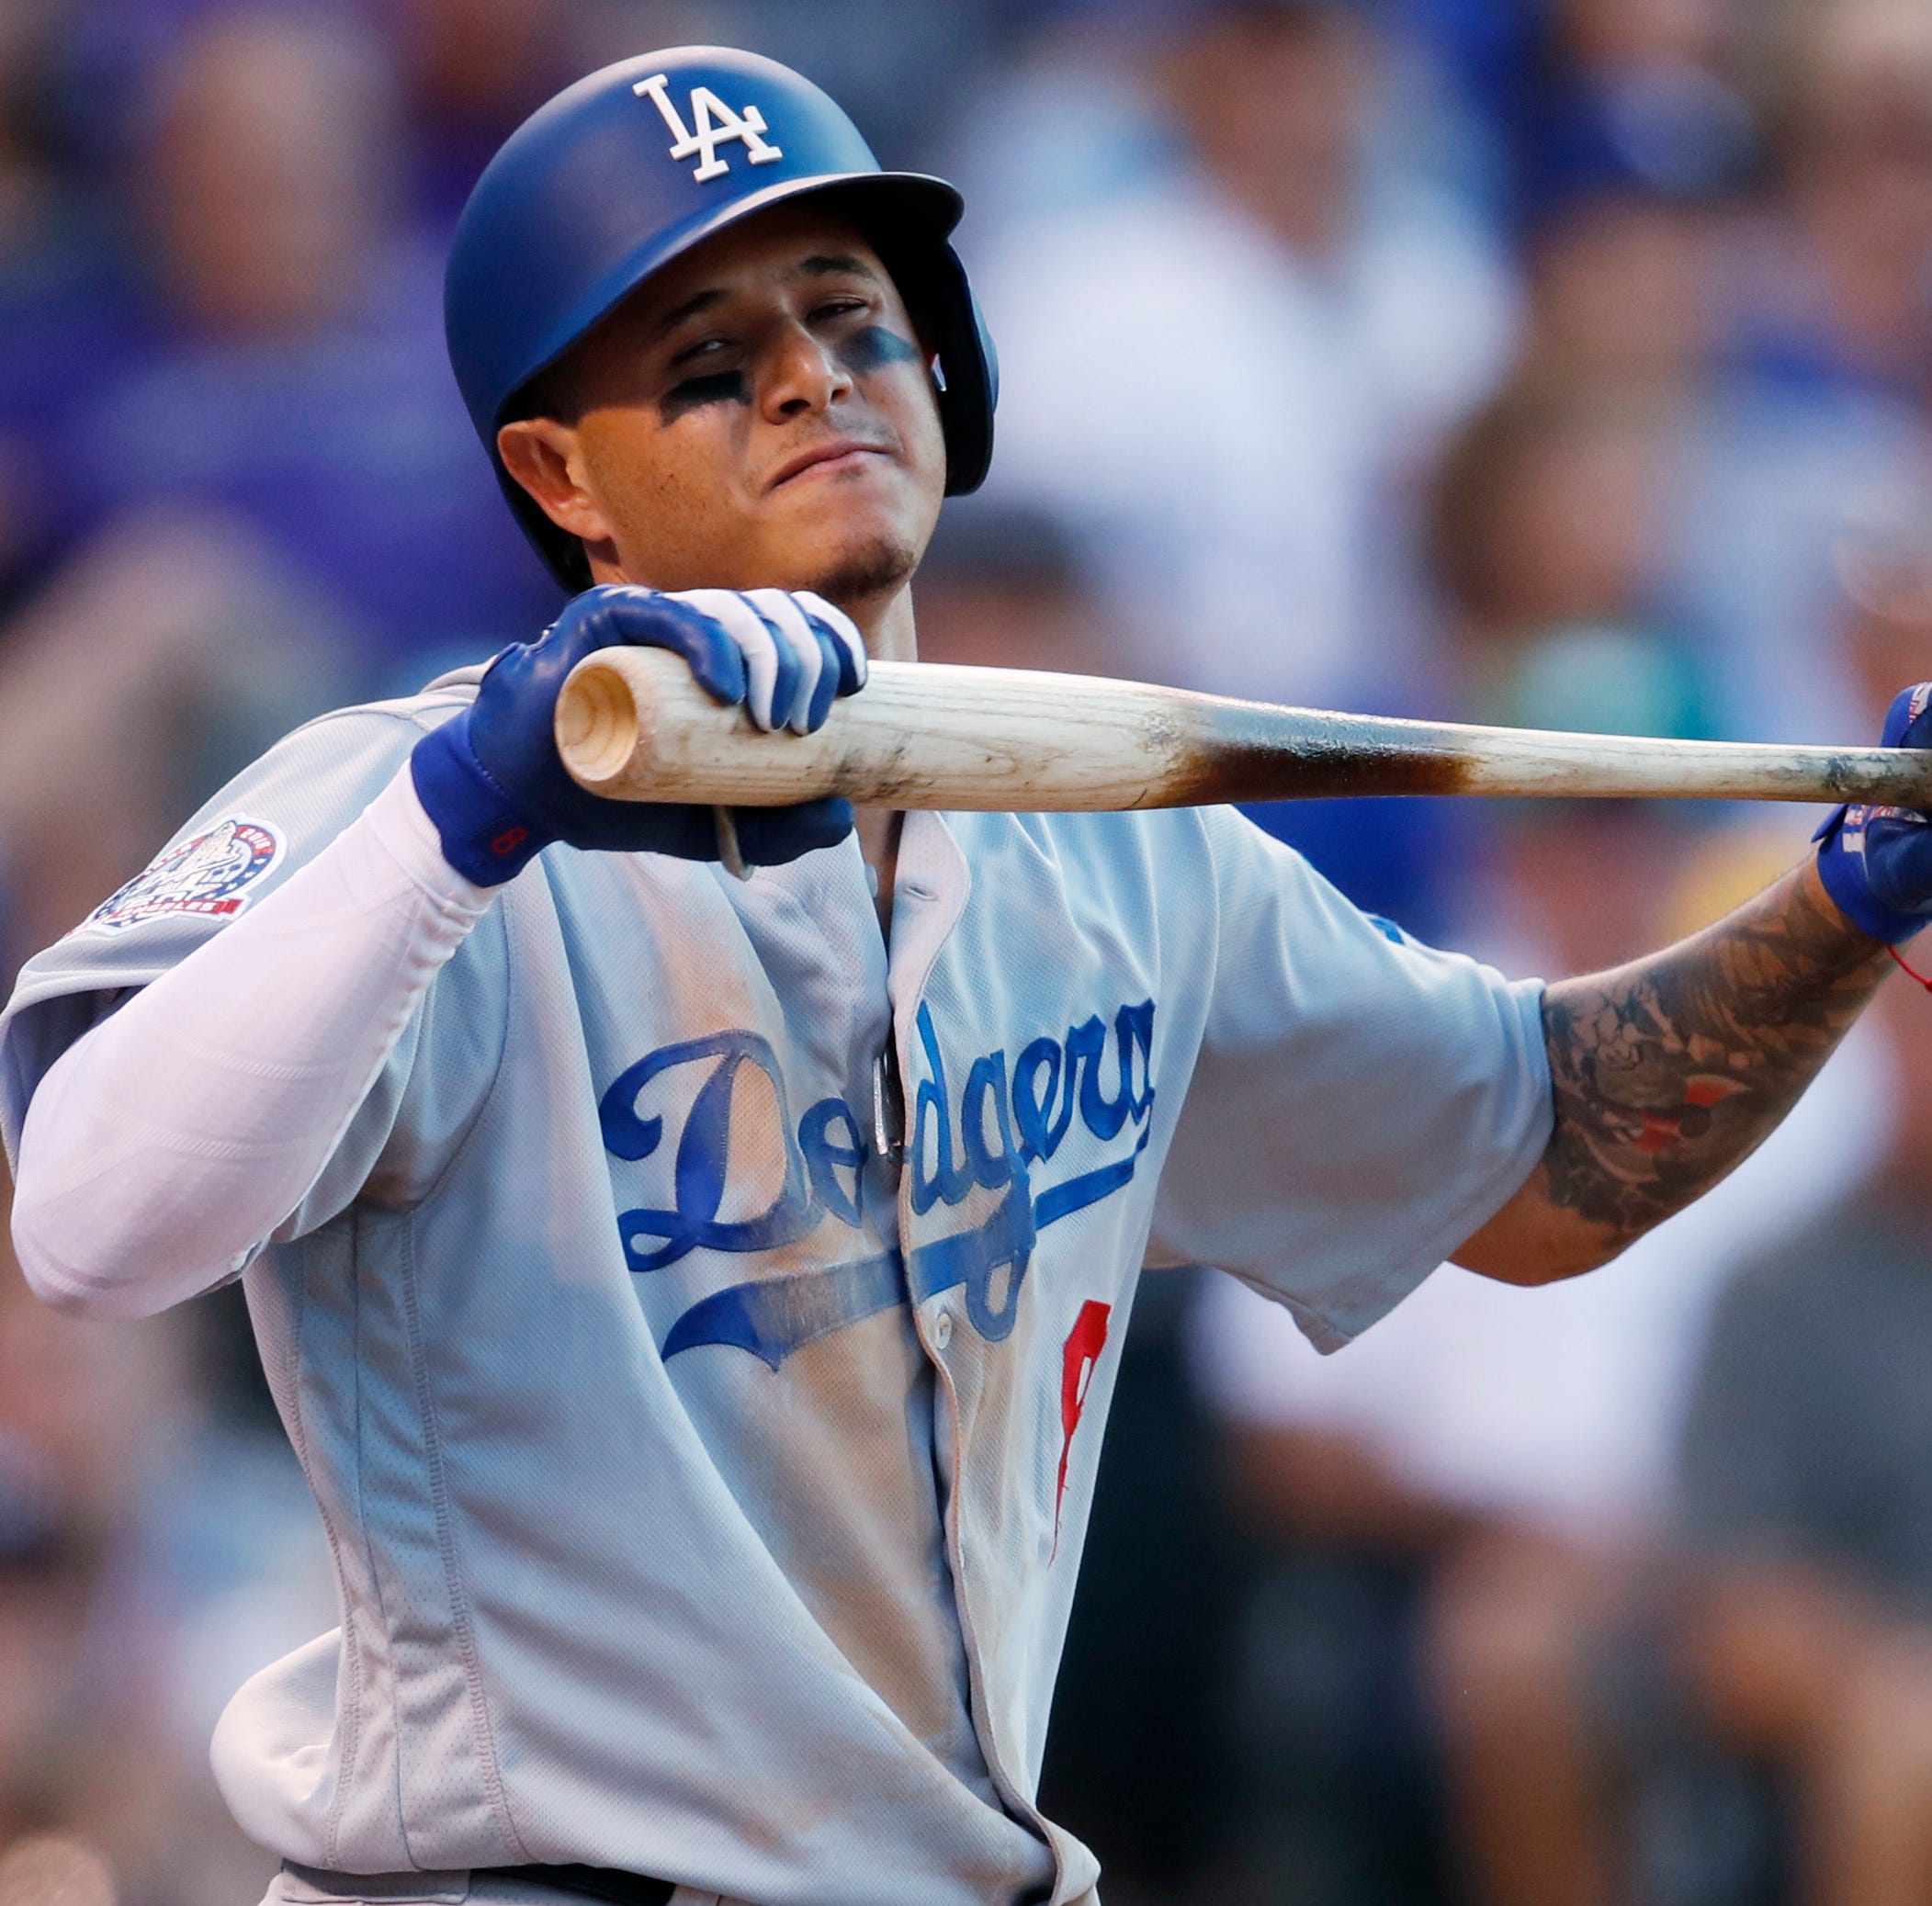 Dodgers shortstop Manny Machado reacts after striking out against the Rockies.